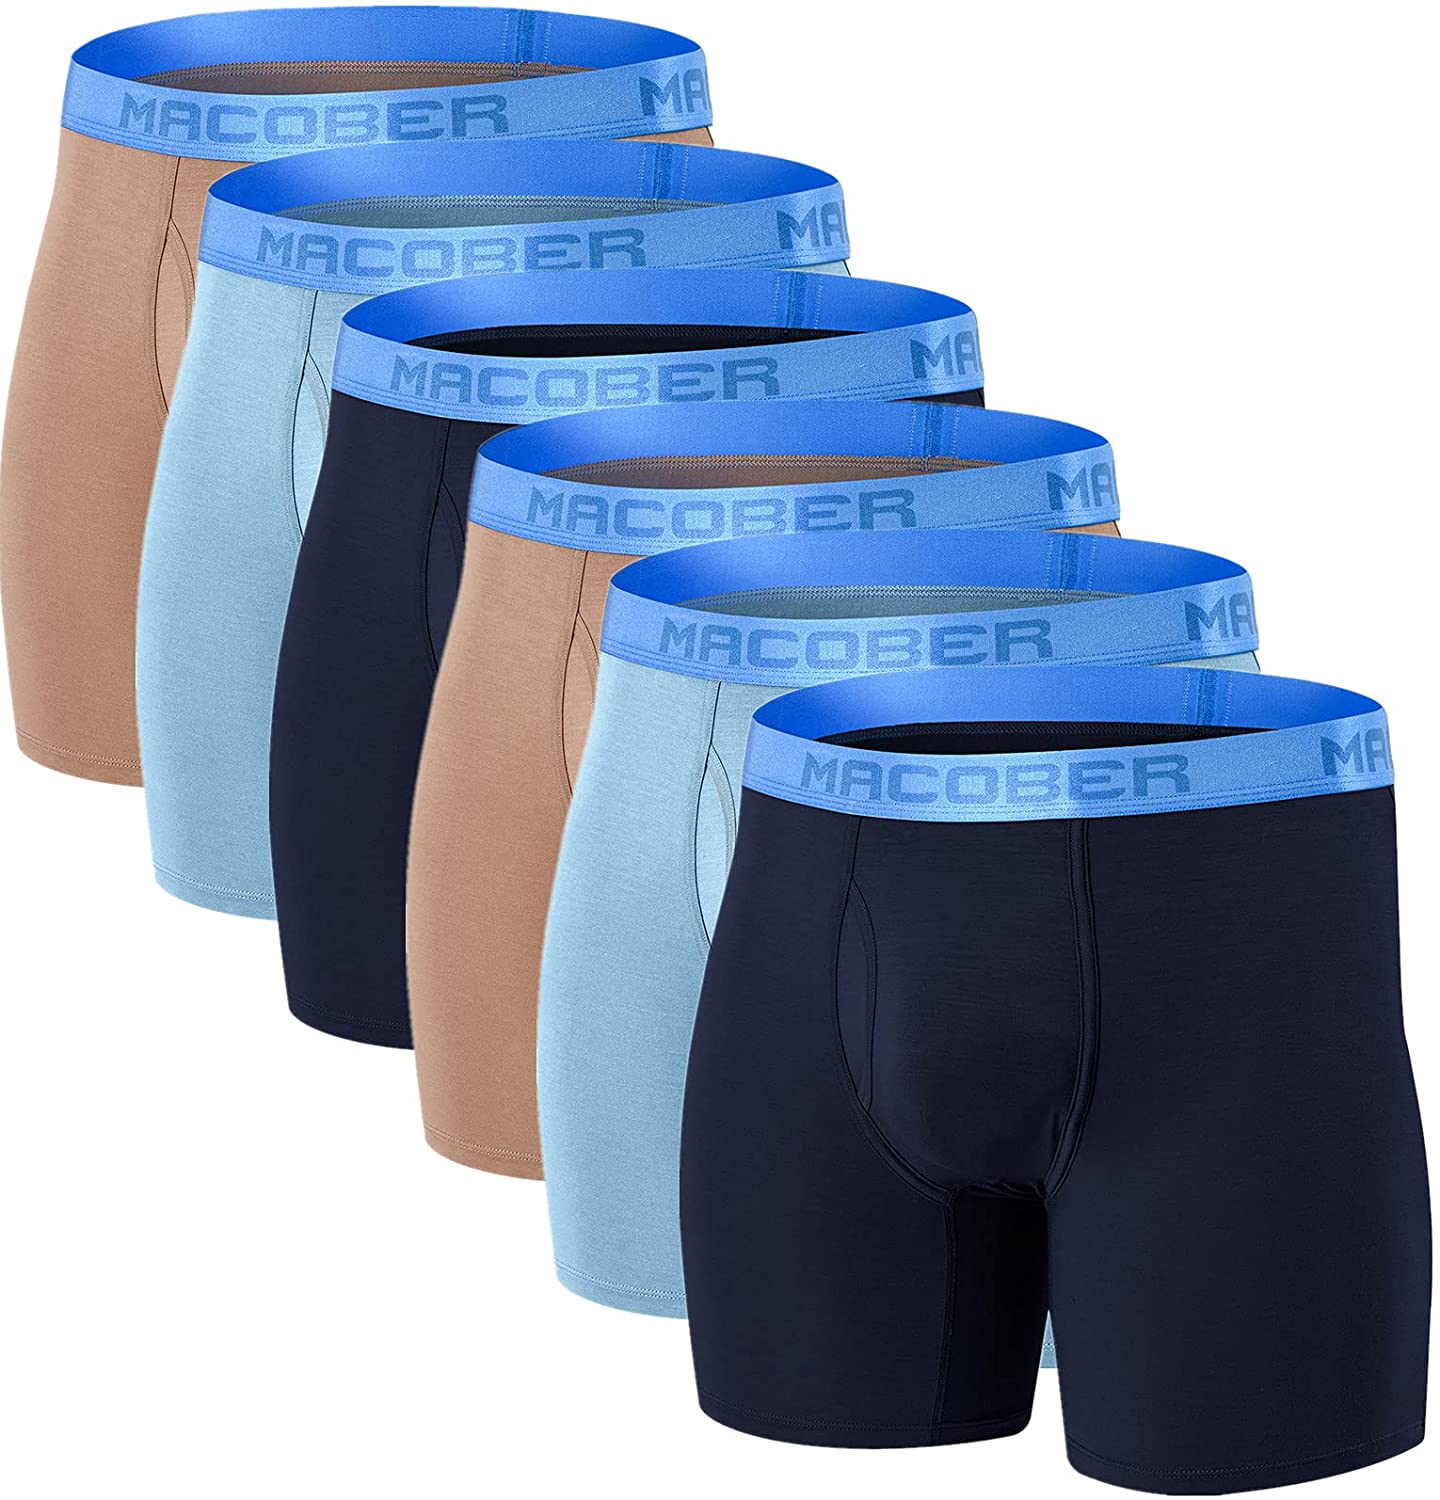 Zonbailon Mens Underwear Boxer Briefs Pack Athletic Breathable Bamboo Big and Tall Cooling Underwear Trunks M L XL XXL 3XL